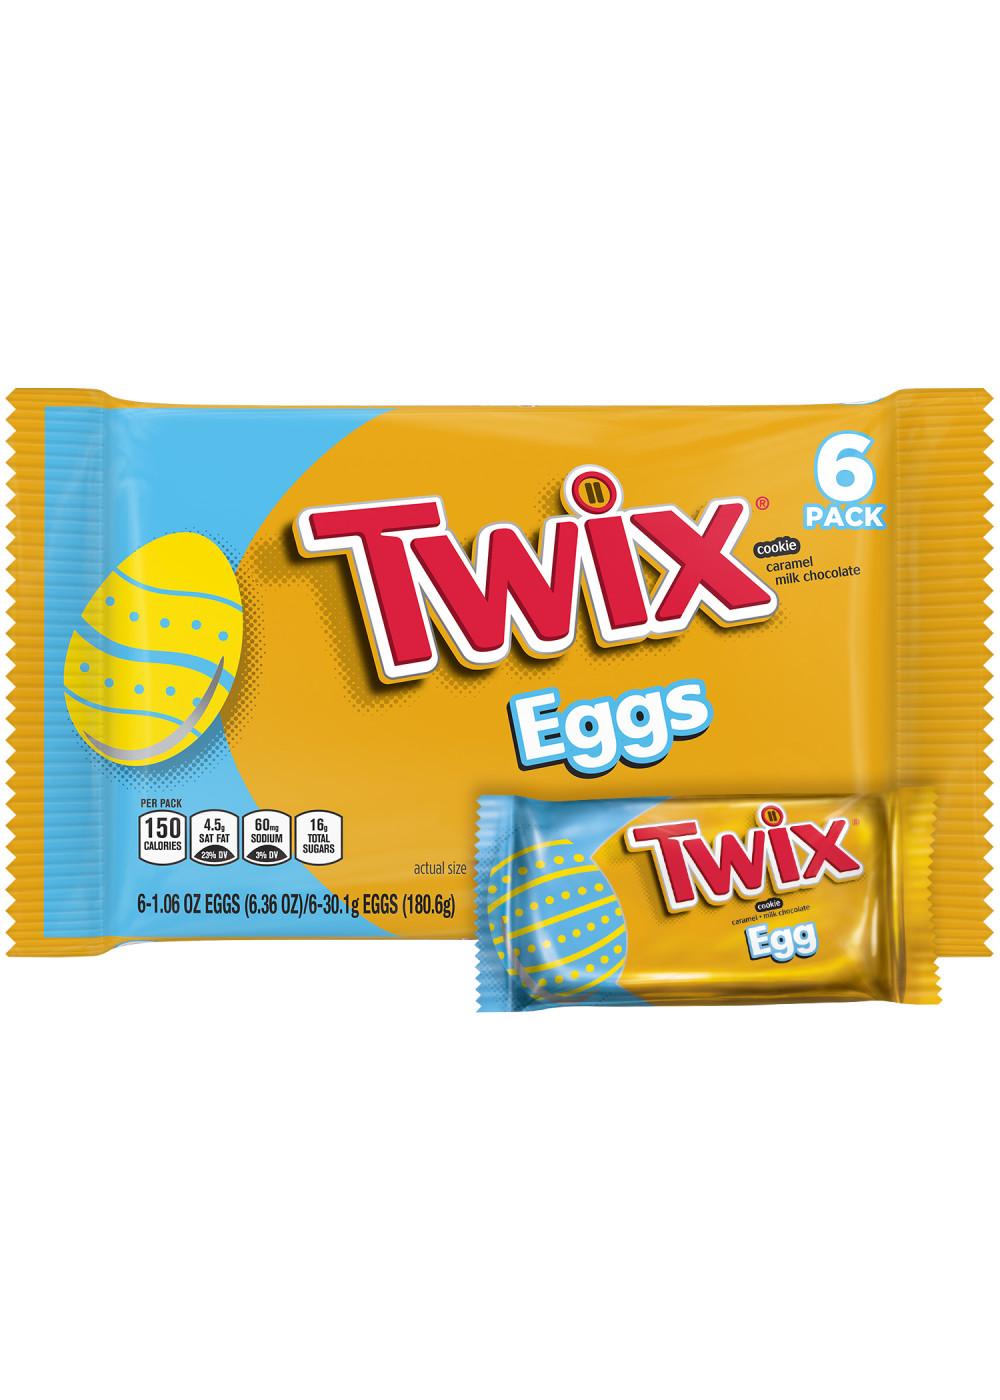 Twix Eggs Easter Candy; image 7 of 8